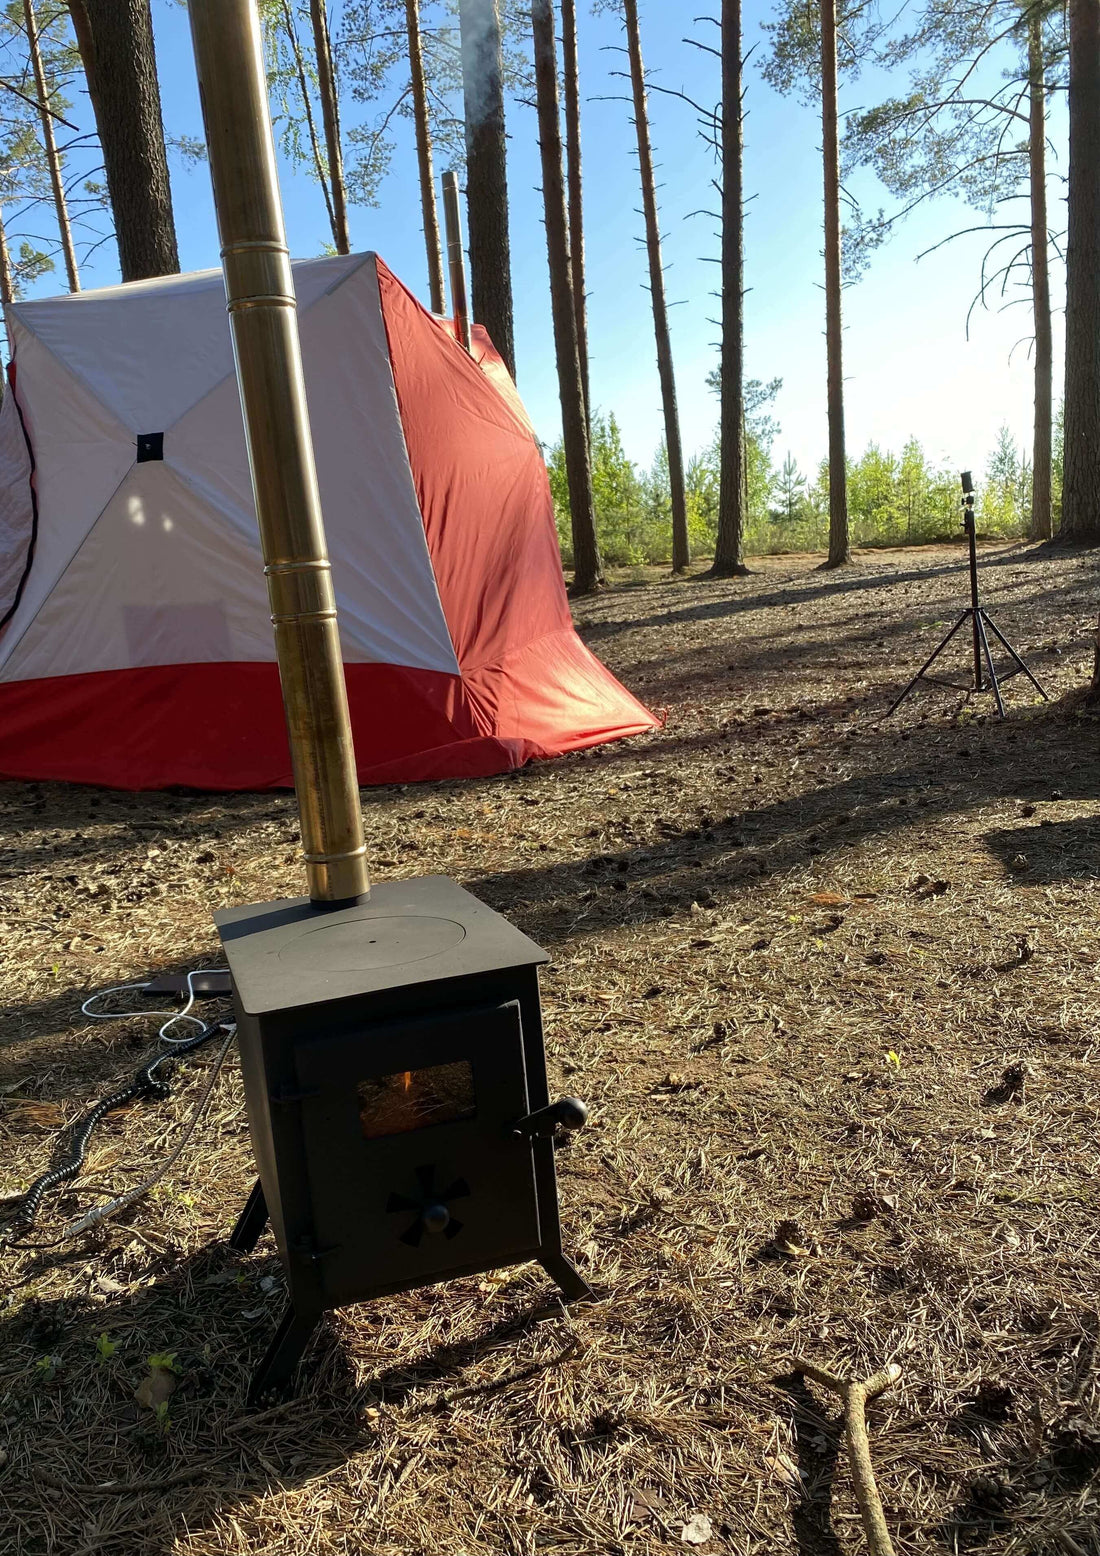 Camping in the woods - necessary things and what to avoid